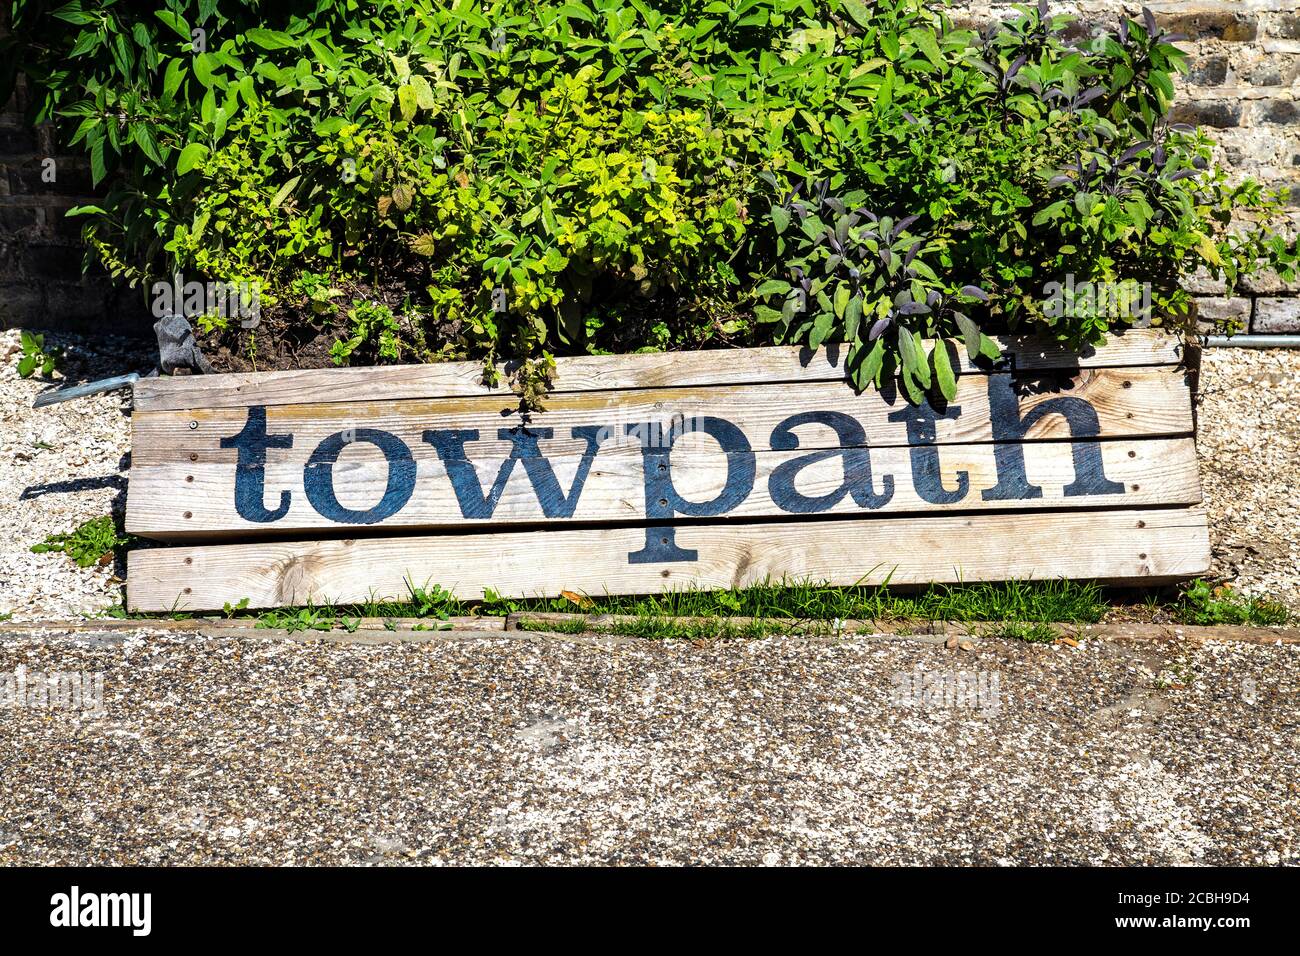 Towpath sign by Regents Canal, London, UK Stock Photo